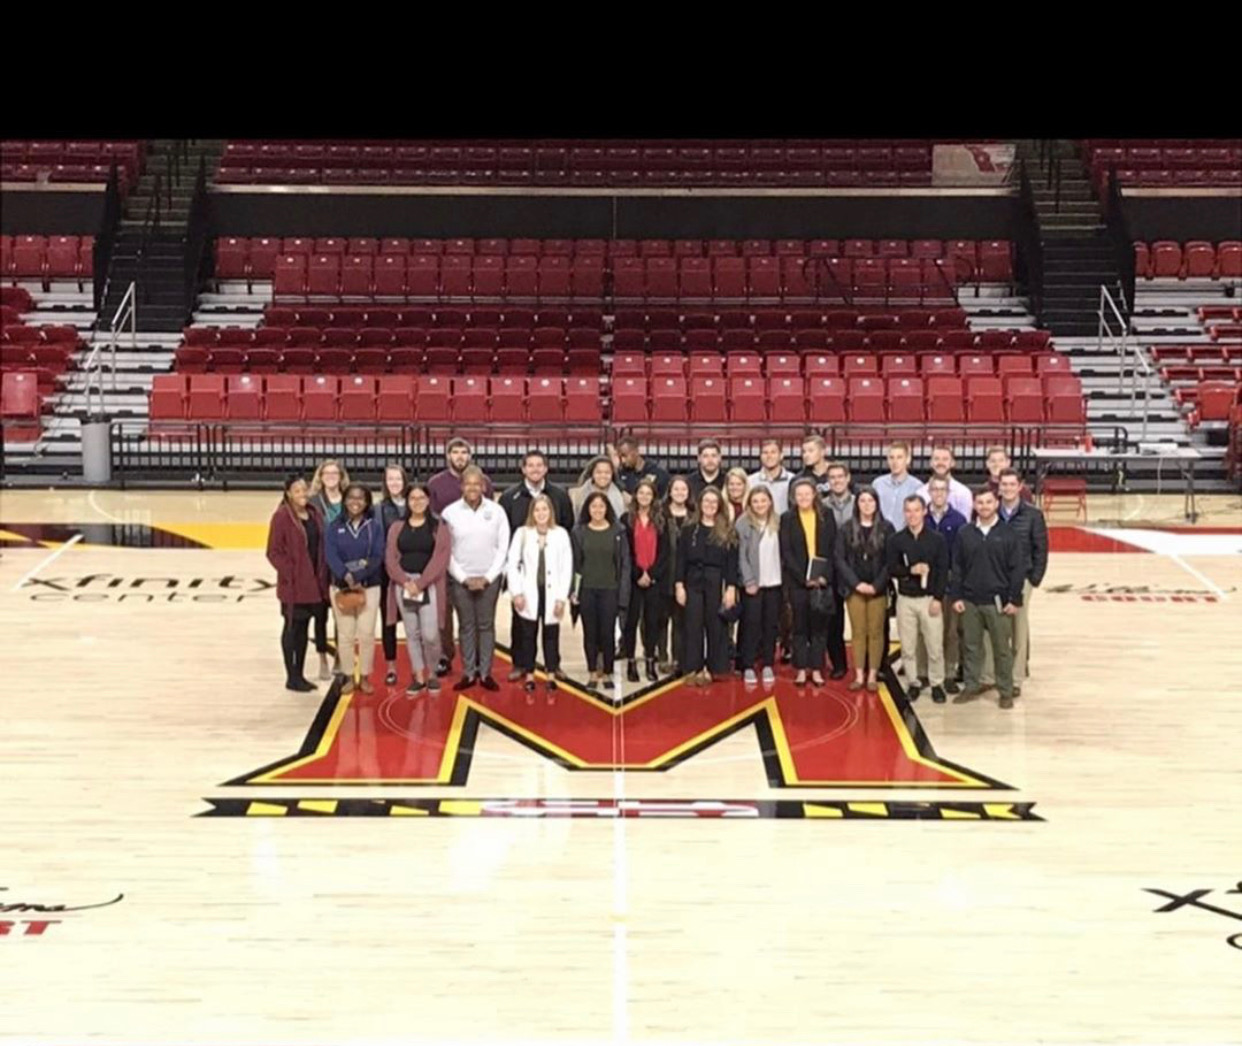 Students on basketball court at Maryland